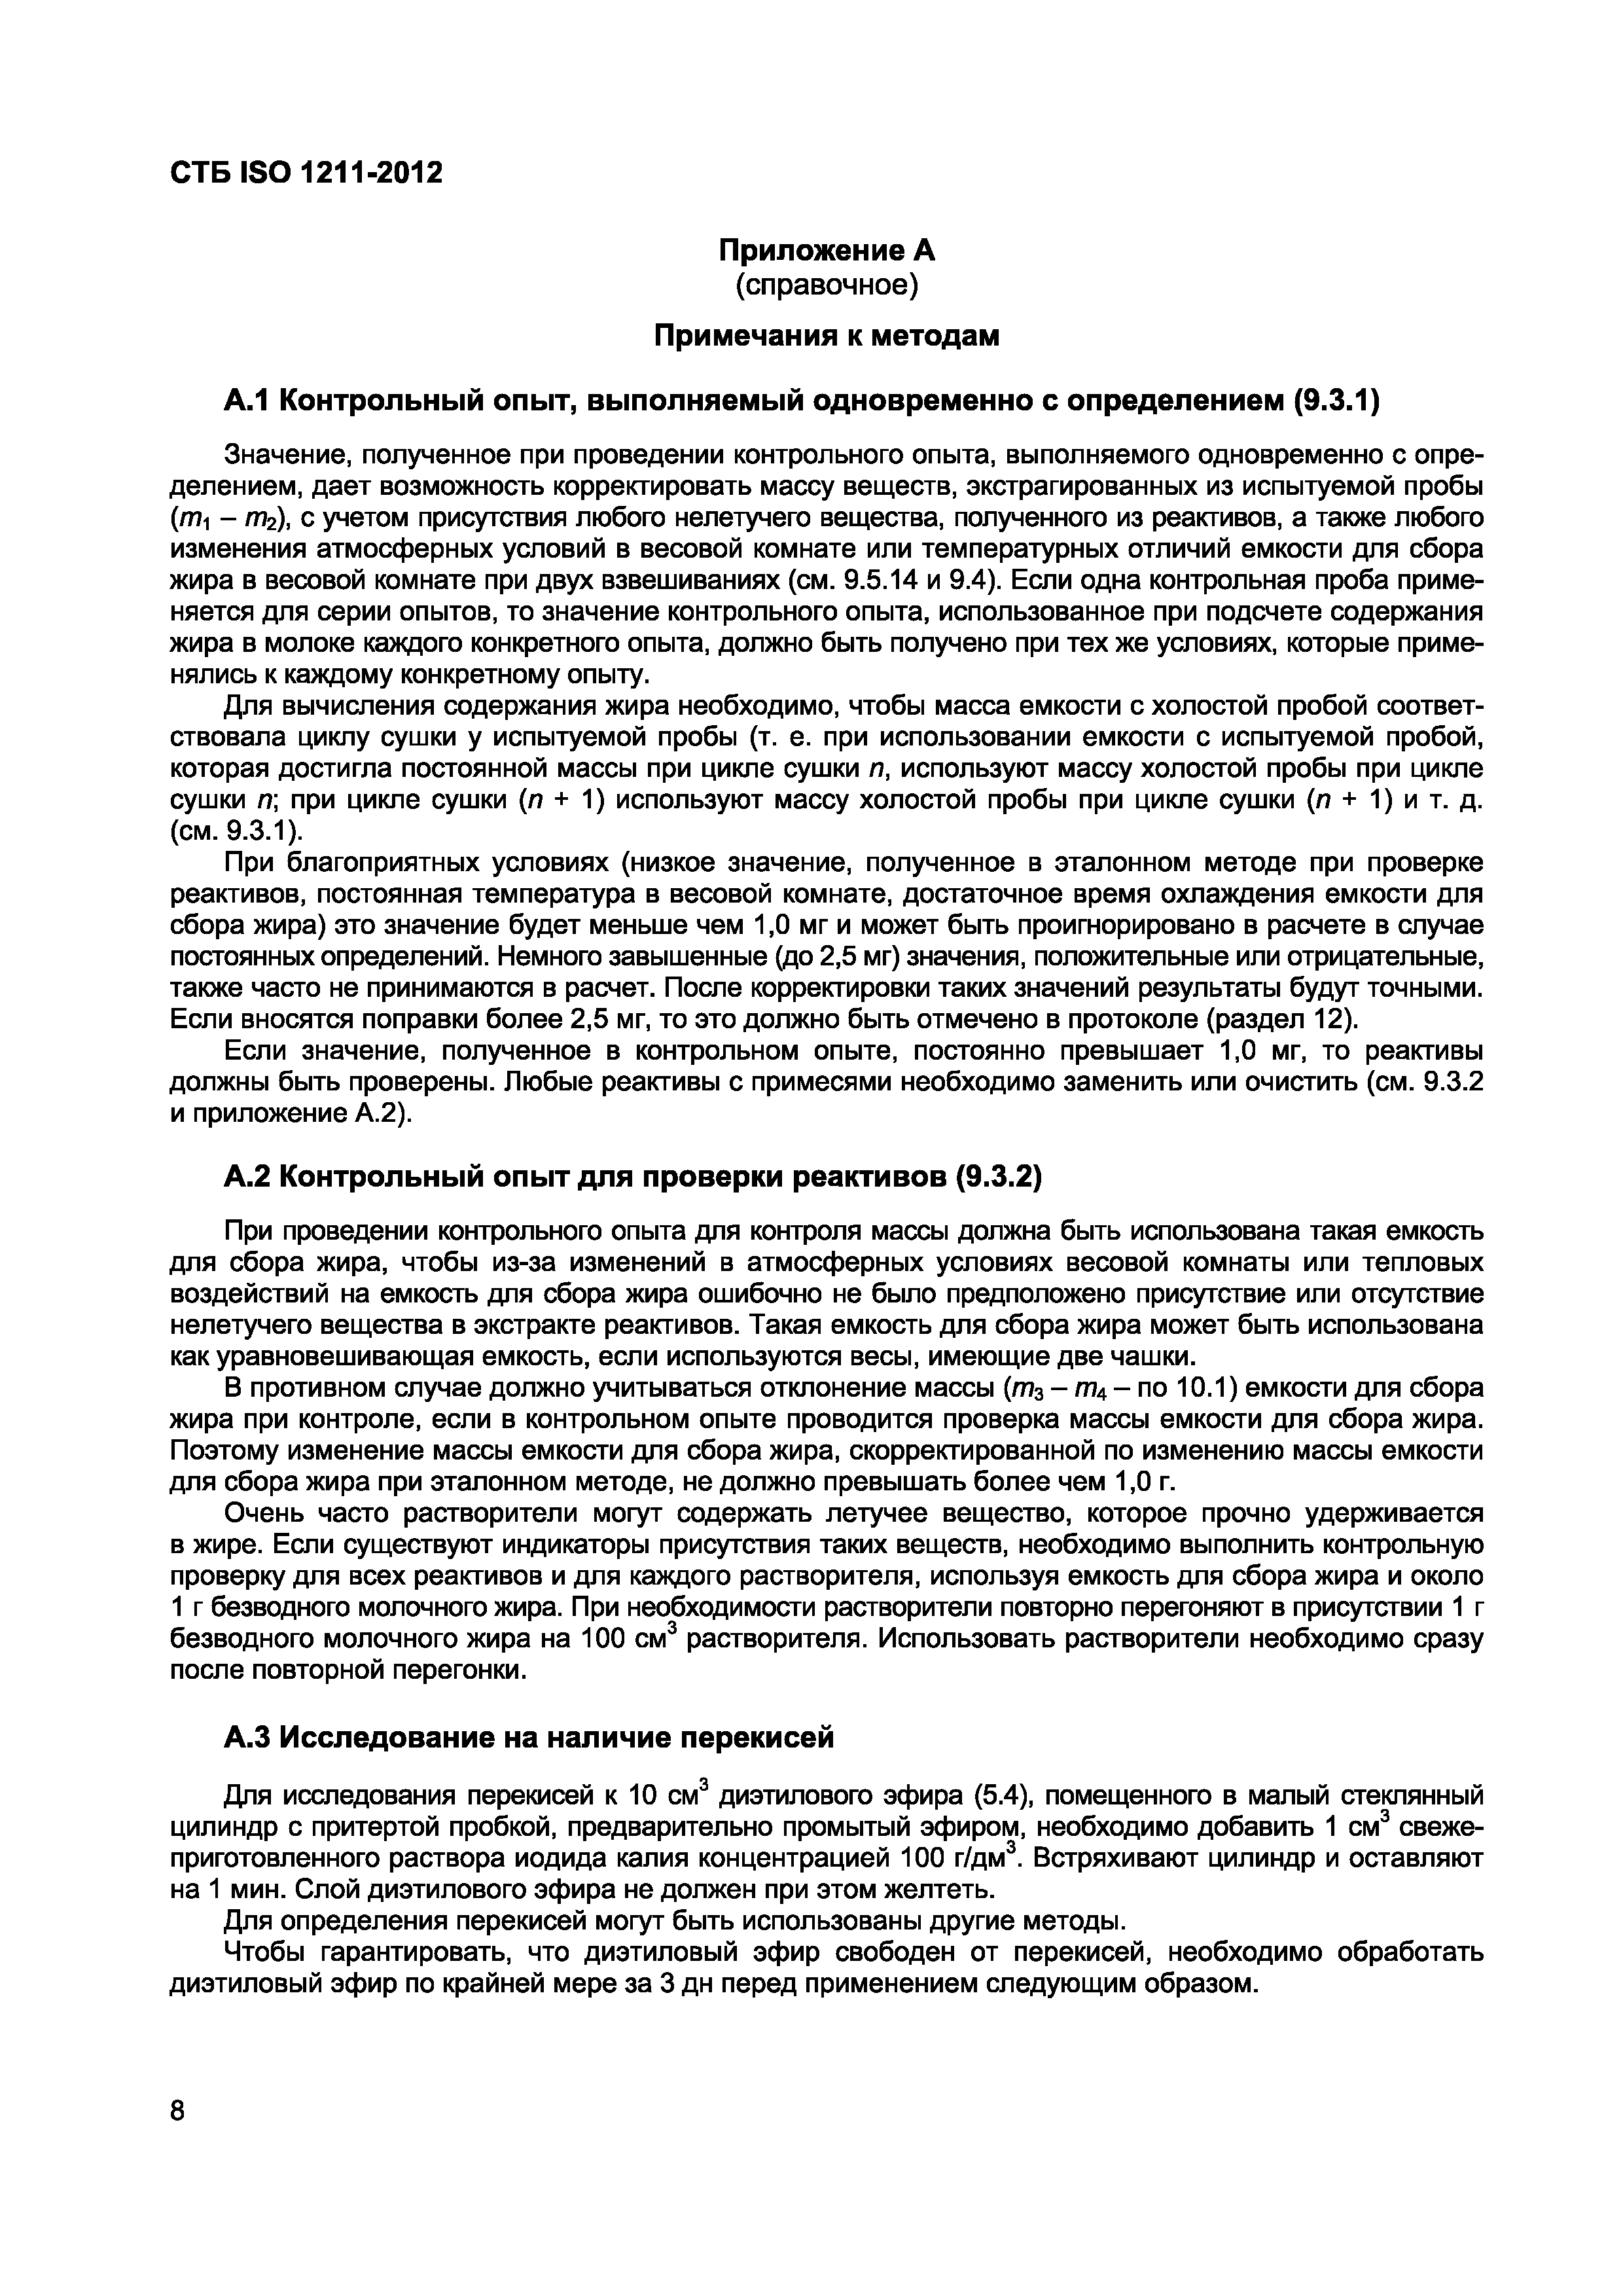 СТБ ISO 1211-2012